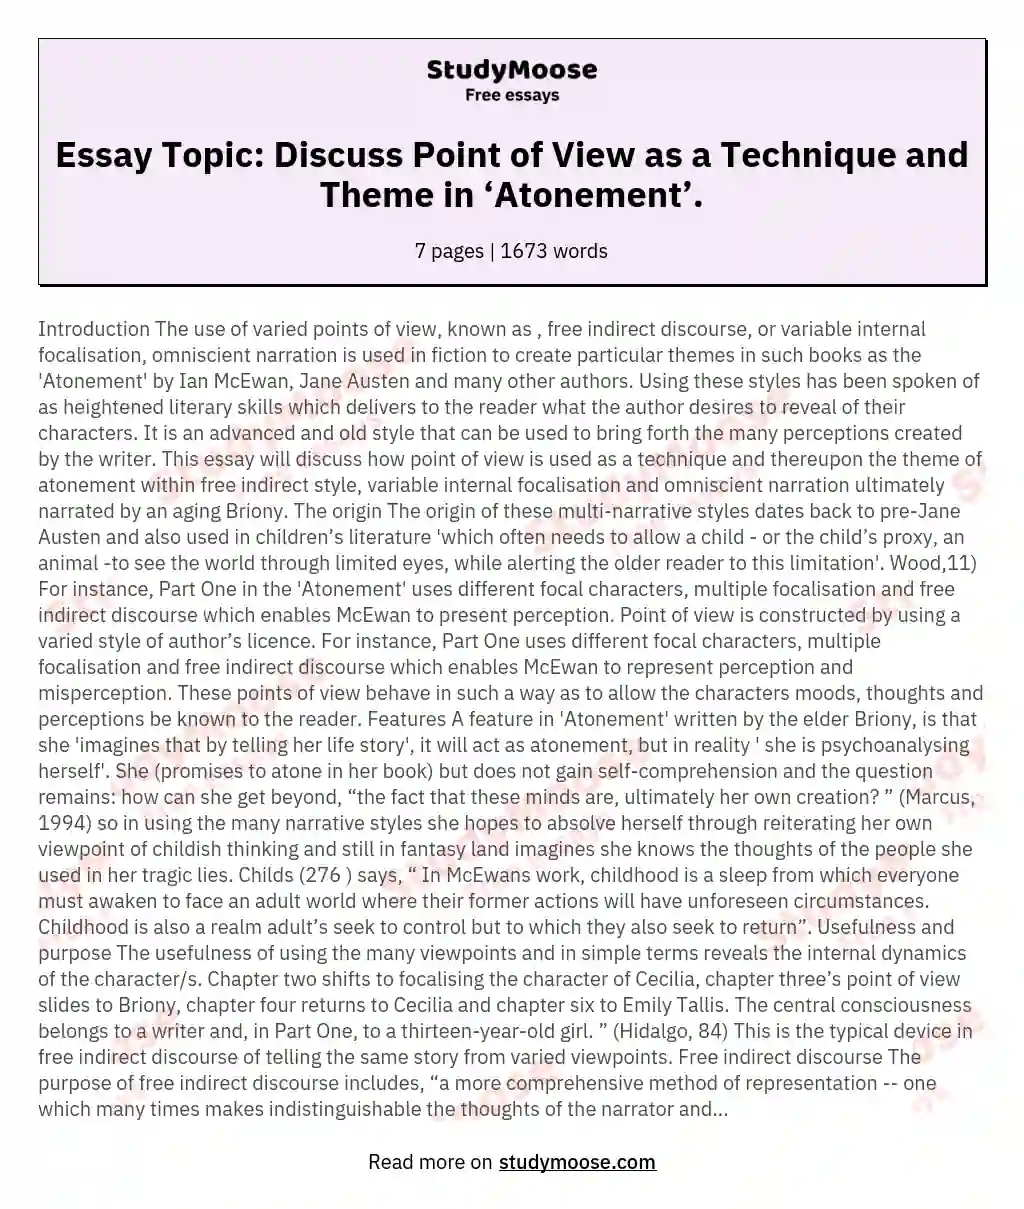 Essay Topic: Discuss Point of View as a Technique and Theme in ‘Atonement’.